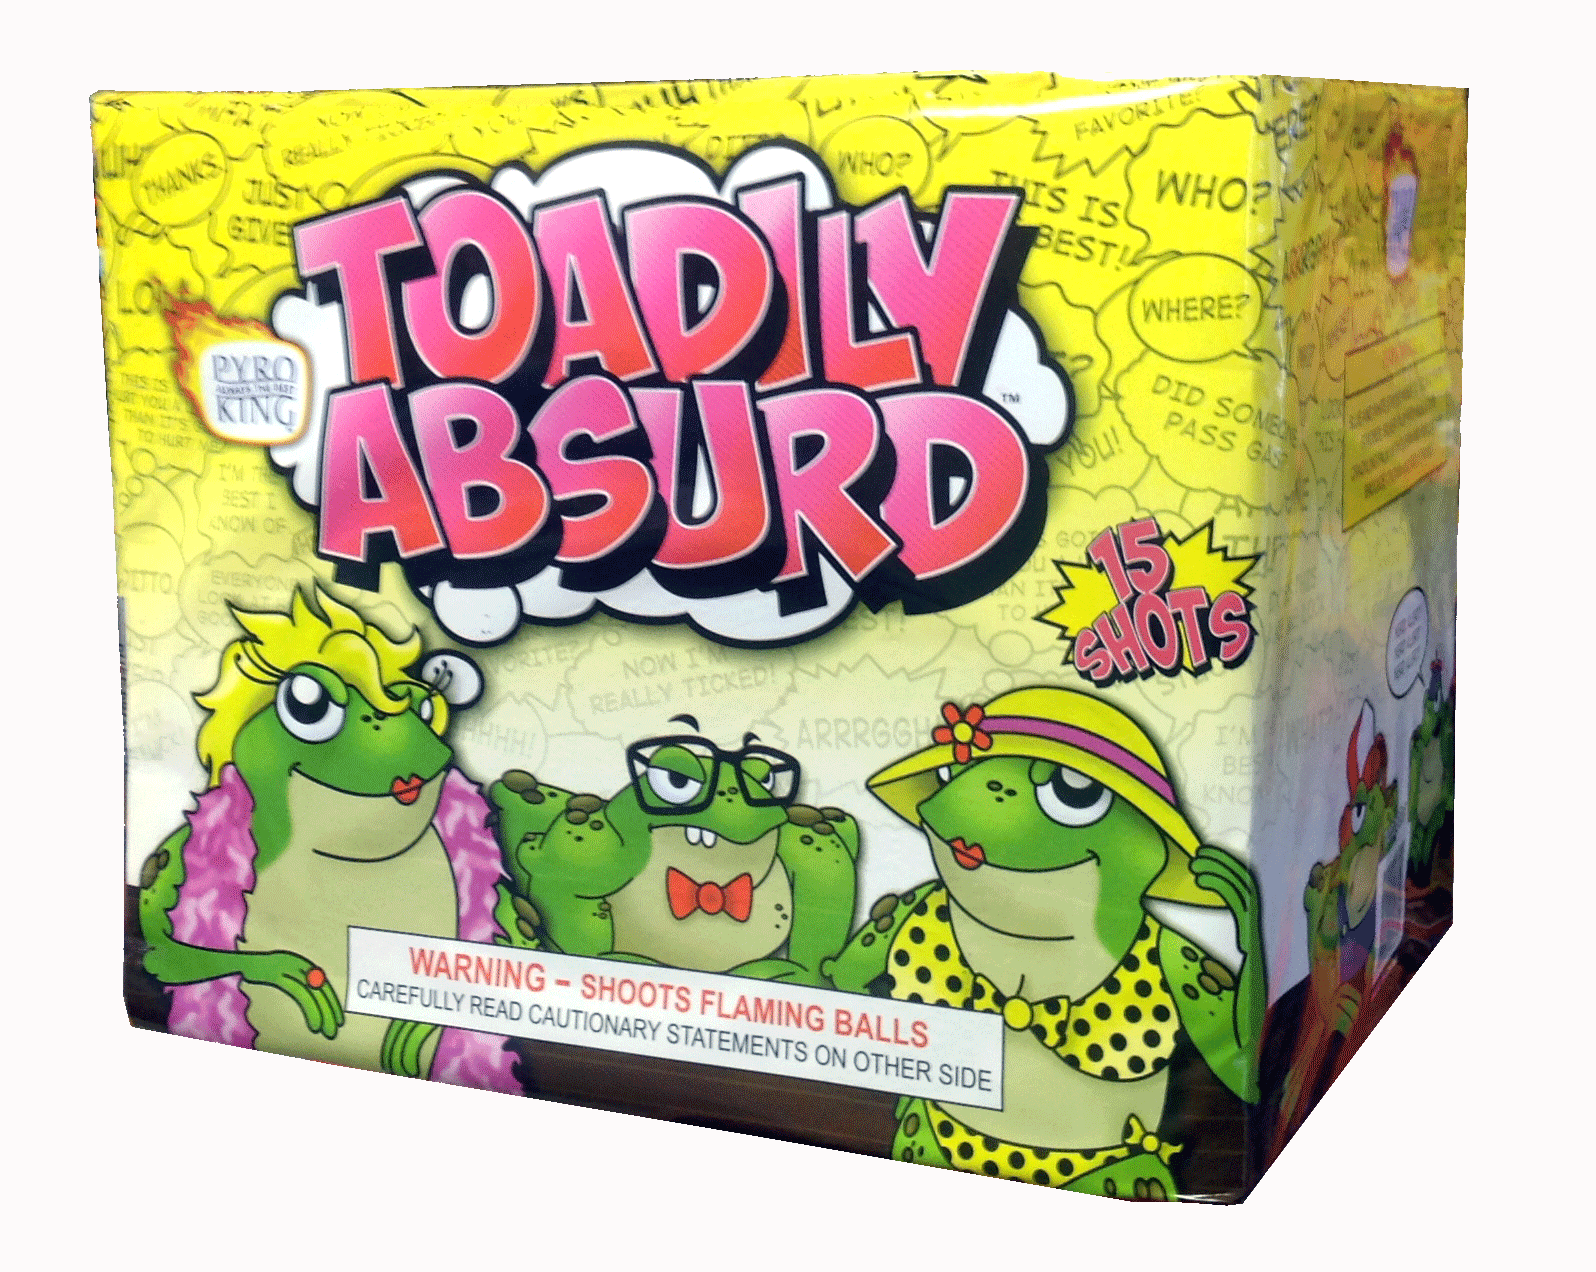 Toadily Absurd 15 shot